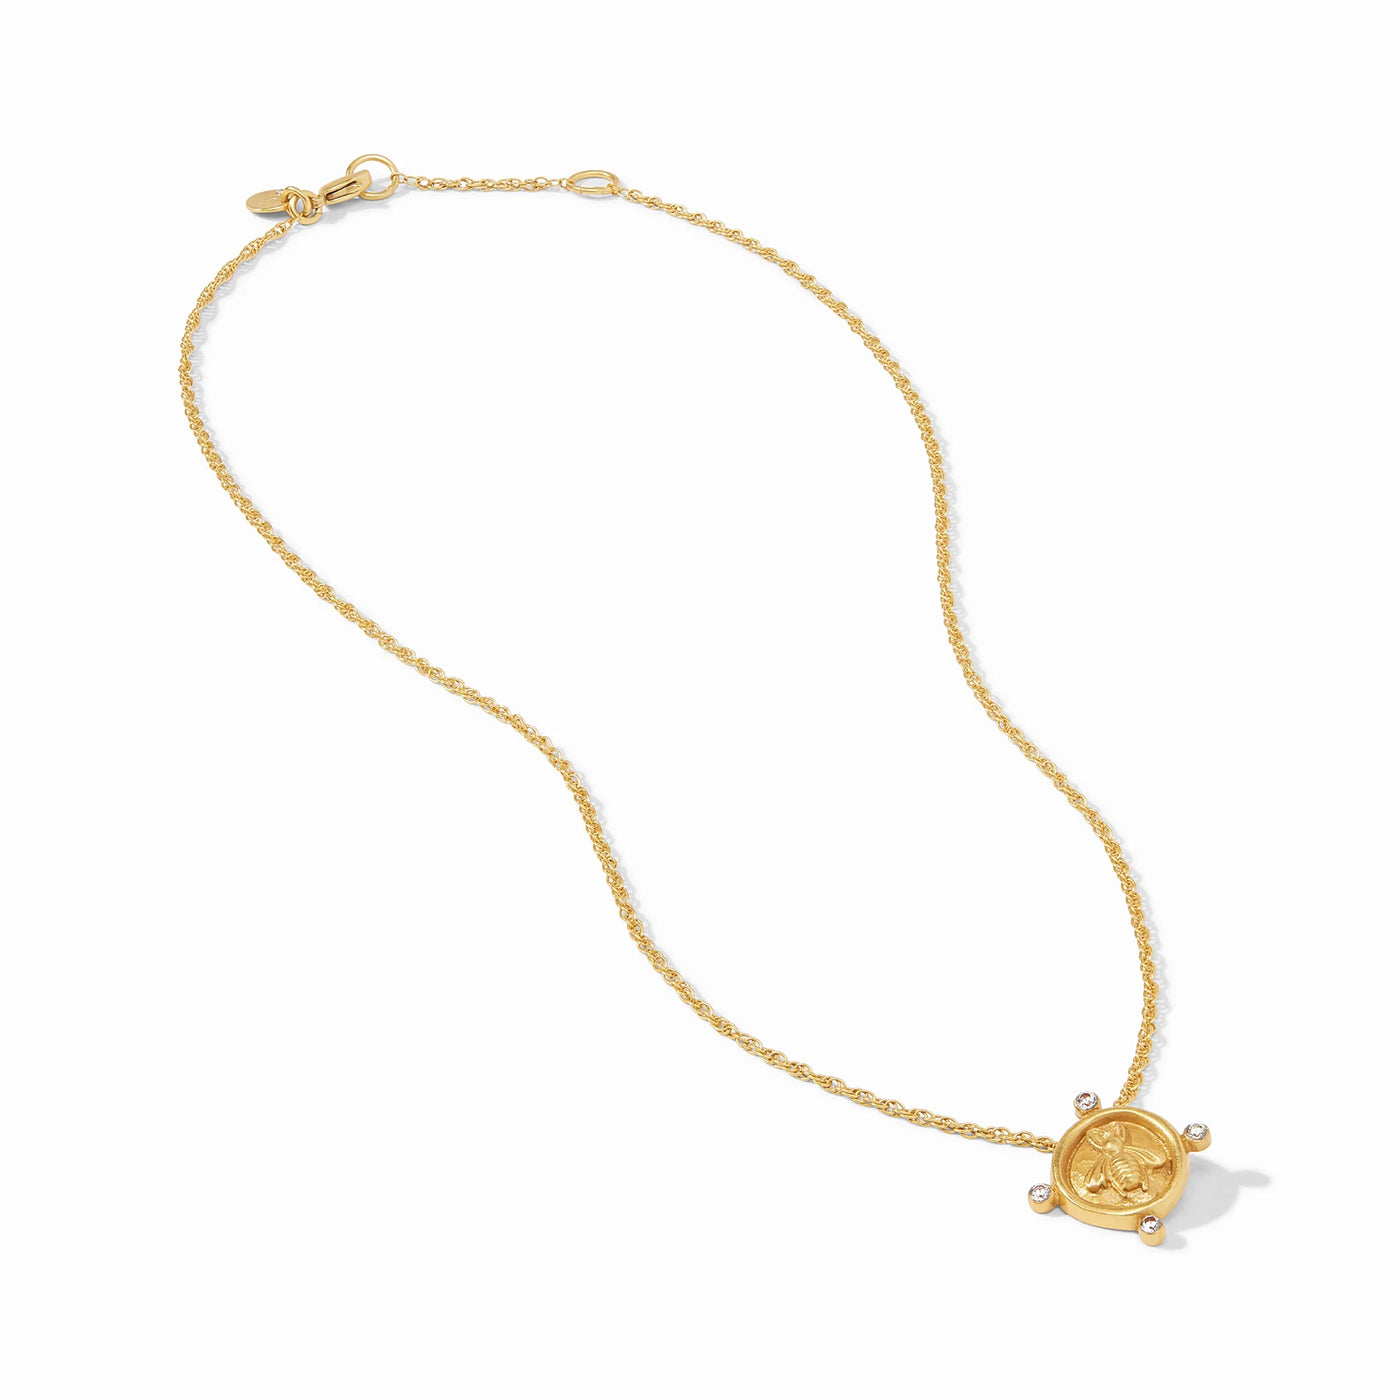 : BEE CAMEO SOLITAIRE NECKLACE :